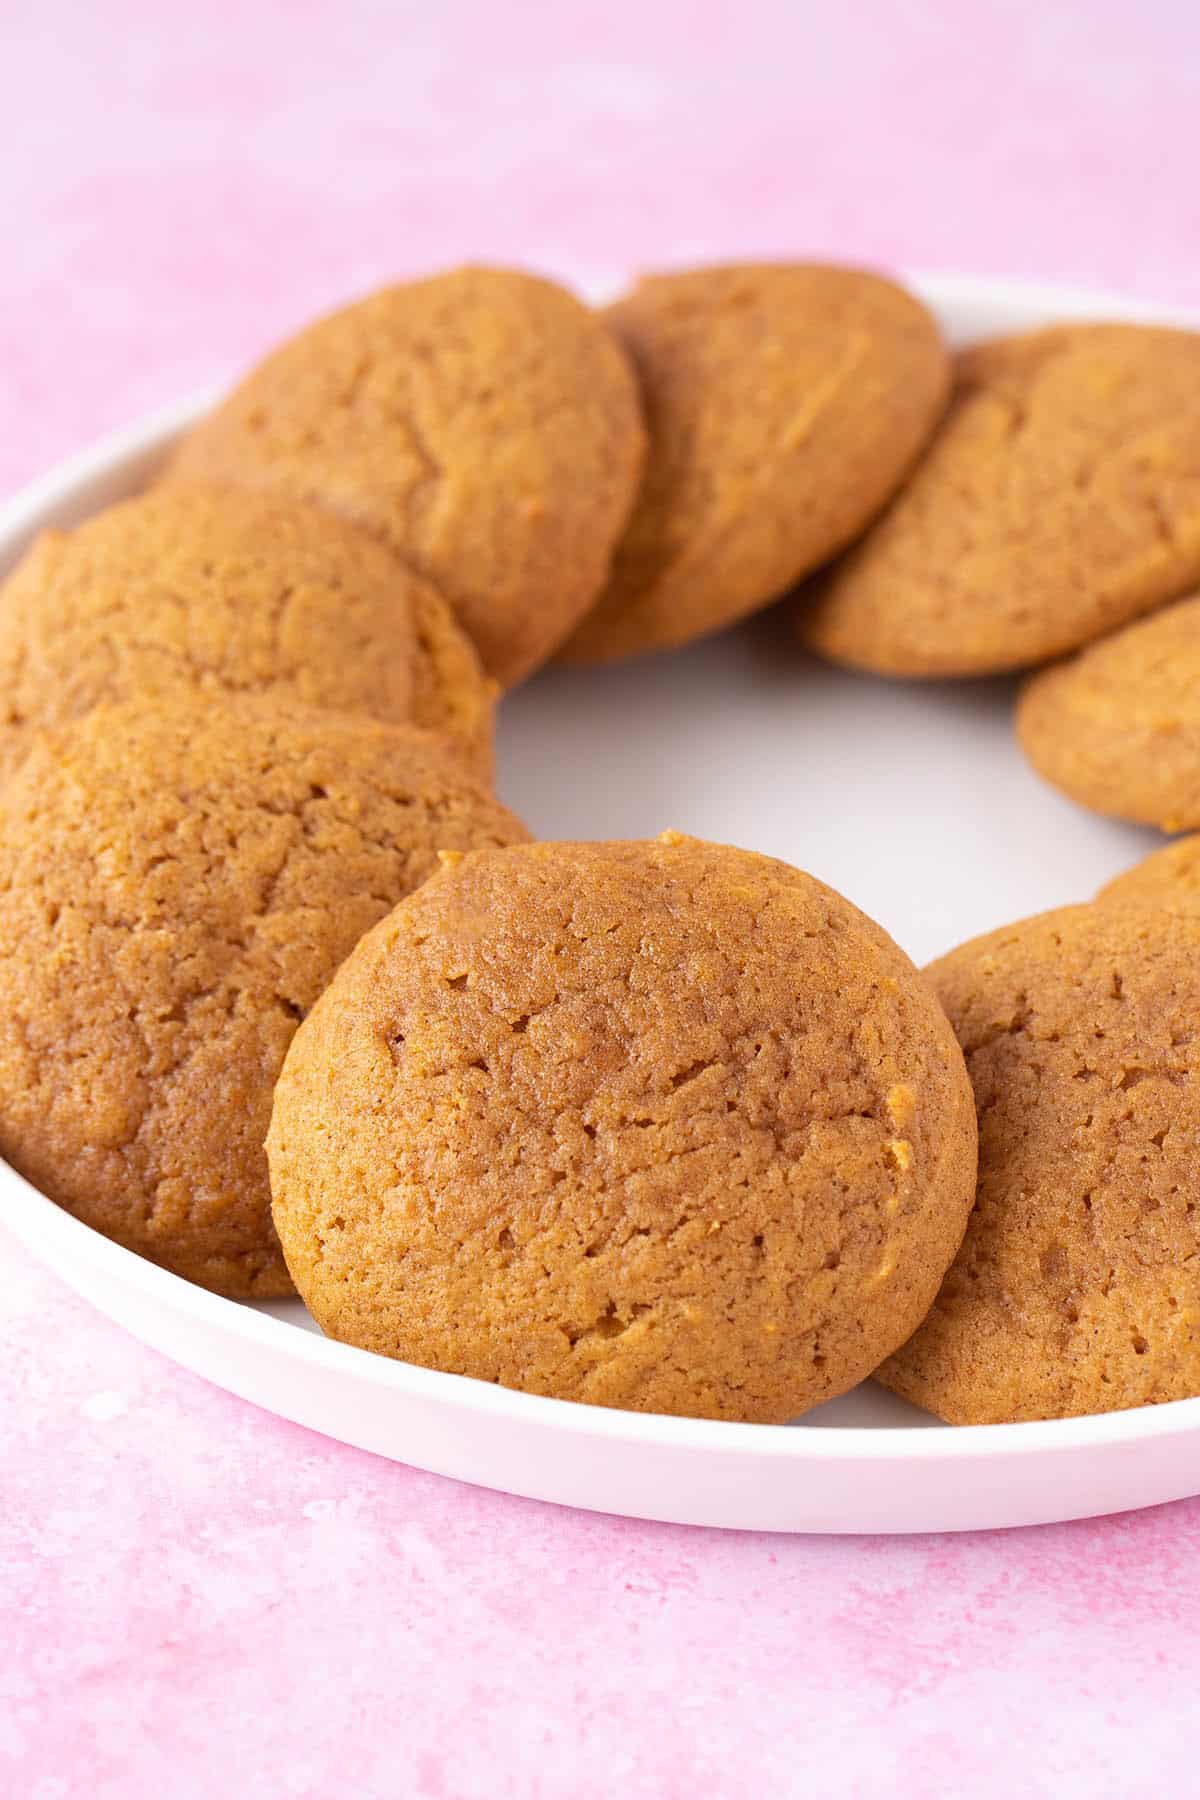 A plate of homemade Pumpkin Cookies on a pink background.